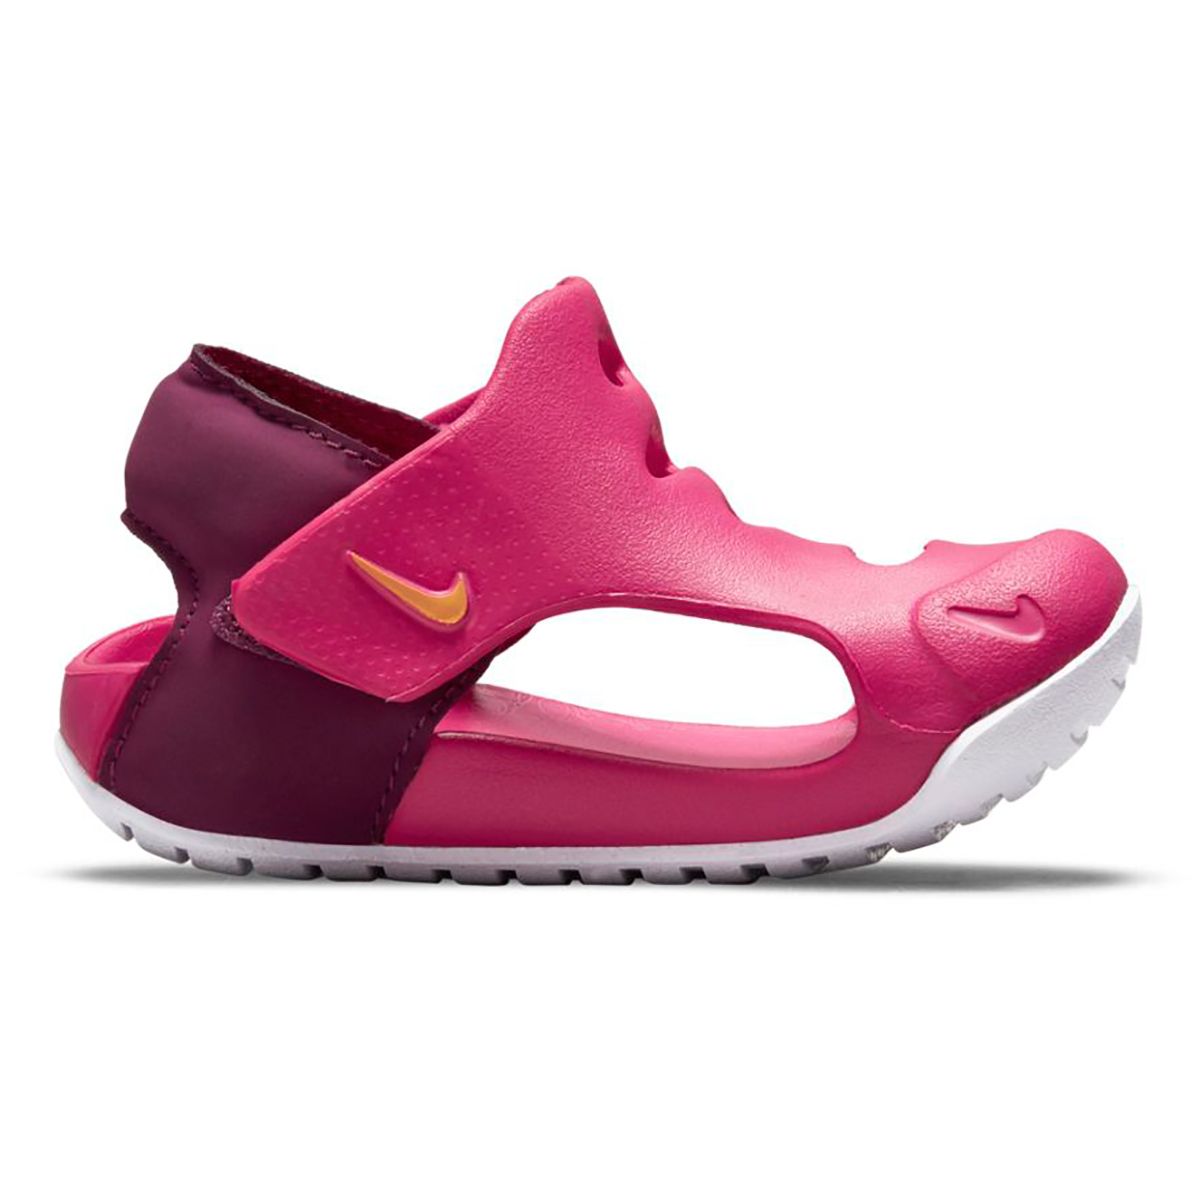 Nike Sunray Protect 3 Toddler Sandals DH9465-602